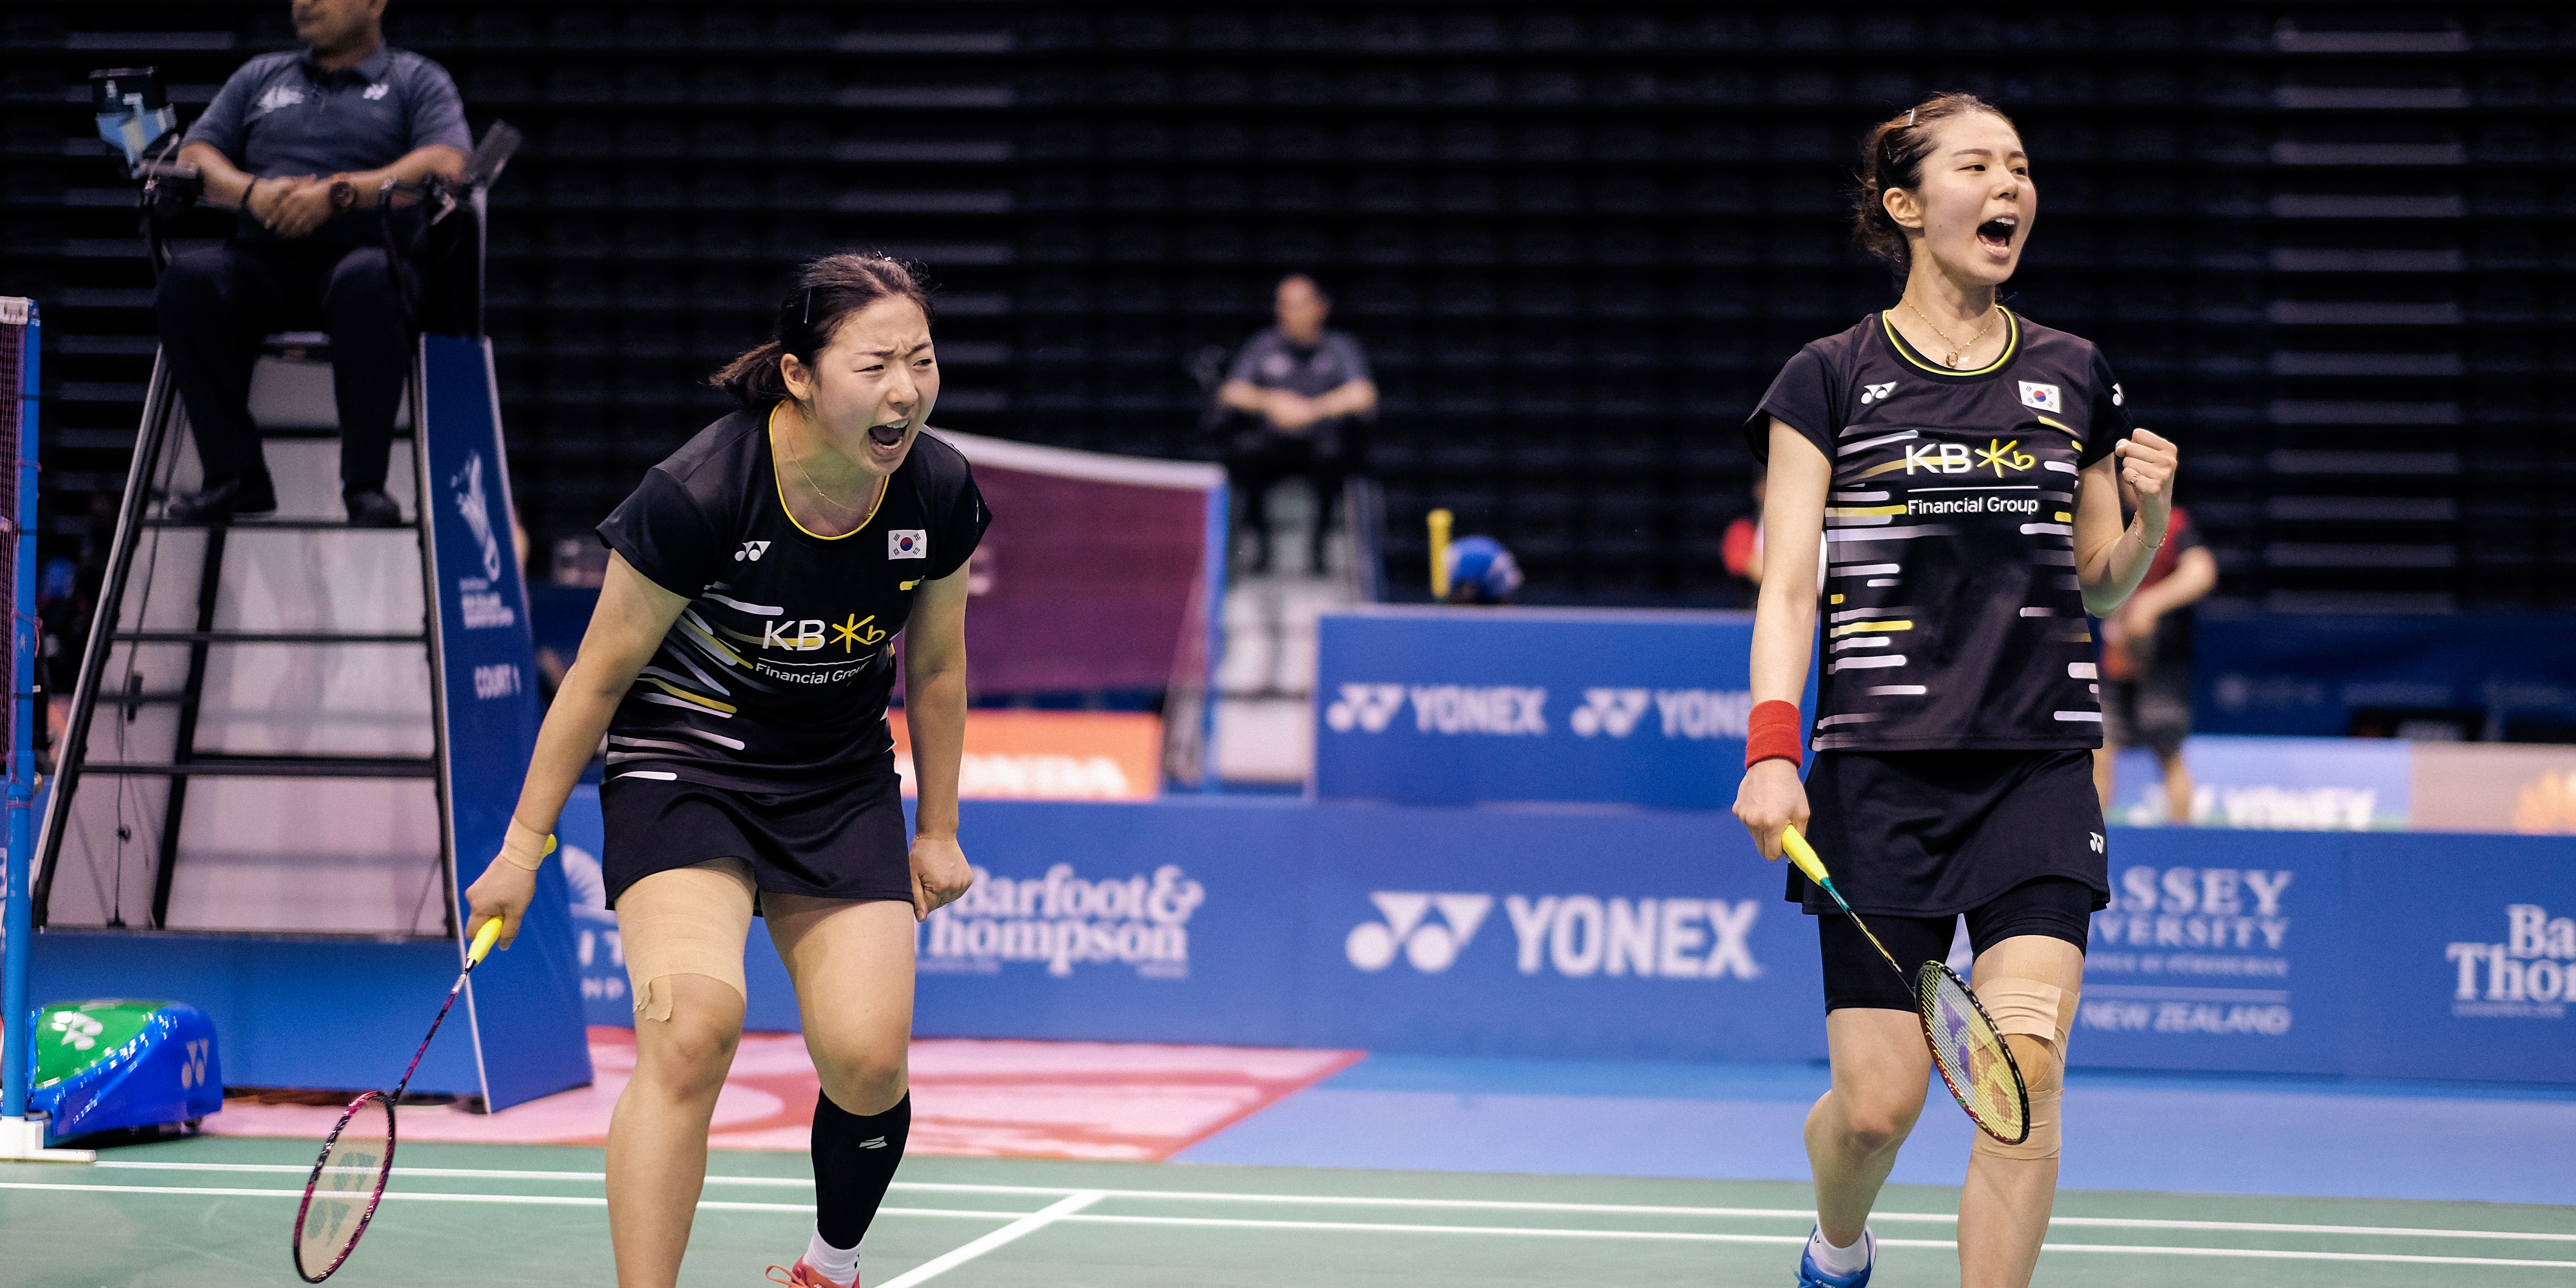 102 minutes and 53 shuttles later…Korea topples Japan in the Semi-Finals #NZBO19